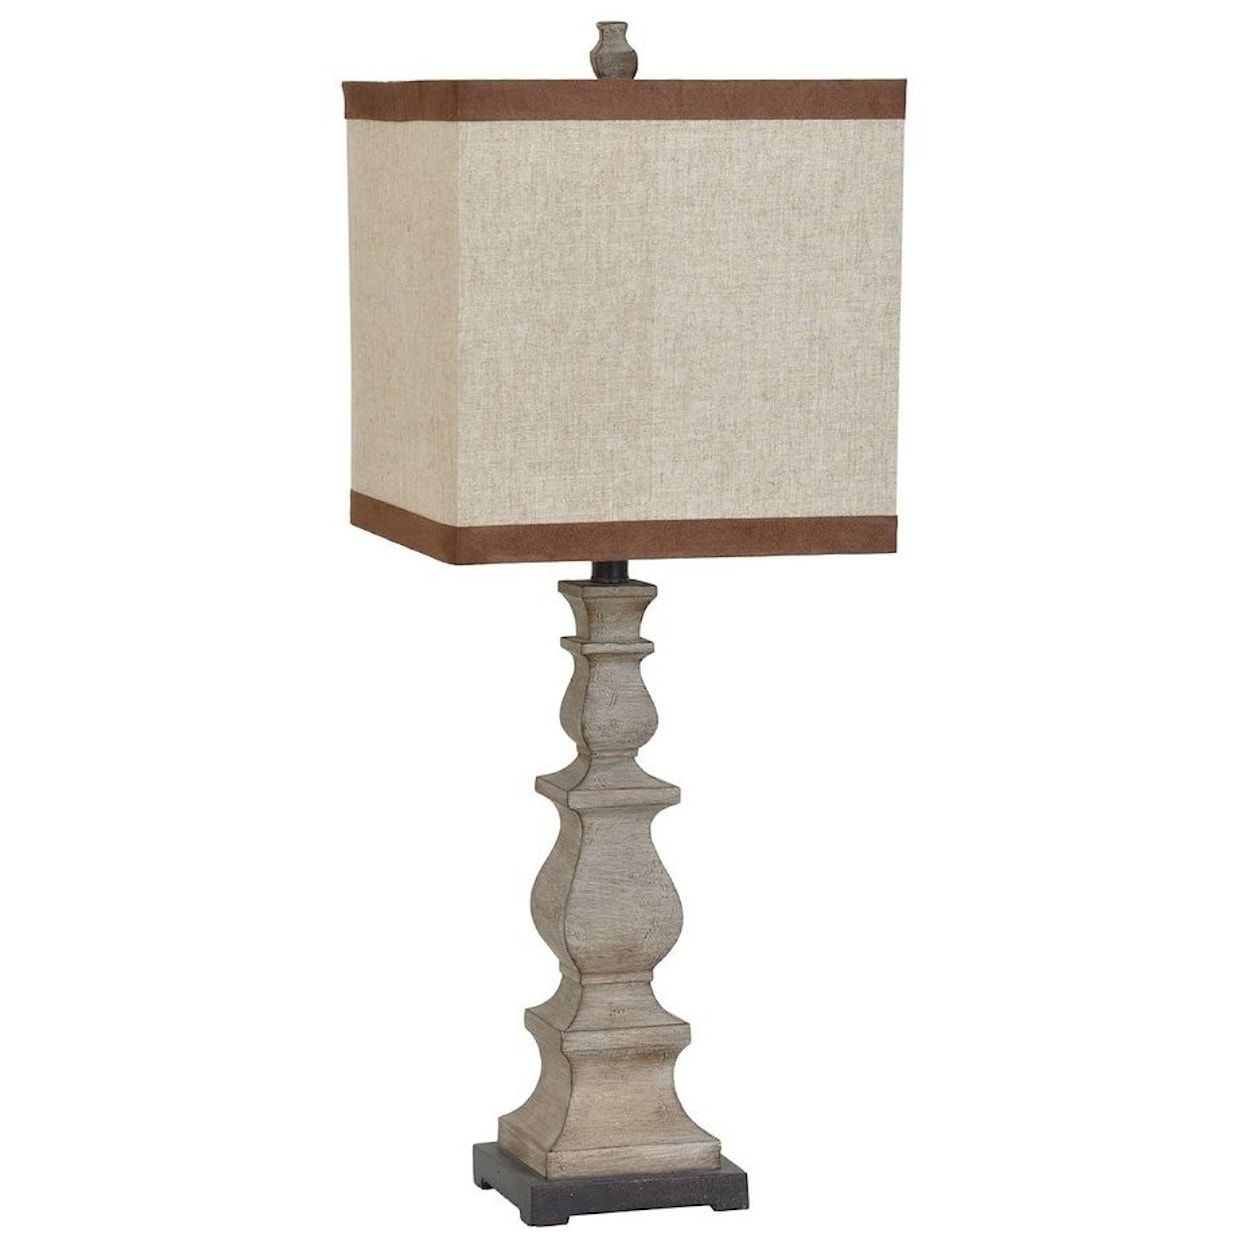 Crestview Collection Lighting Burgess Table Lamp